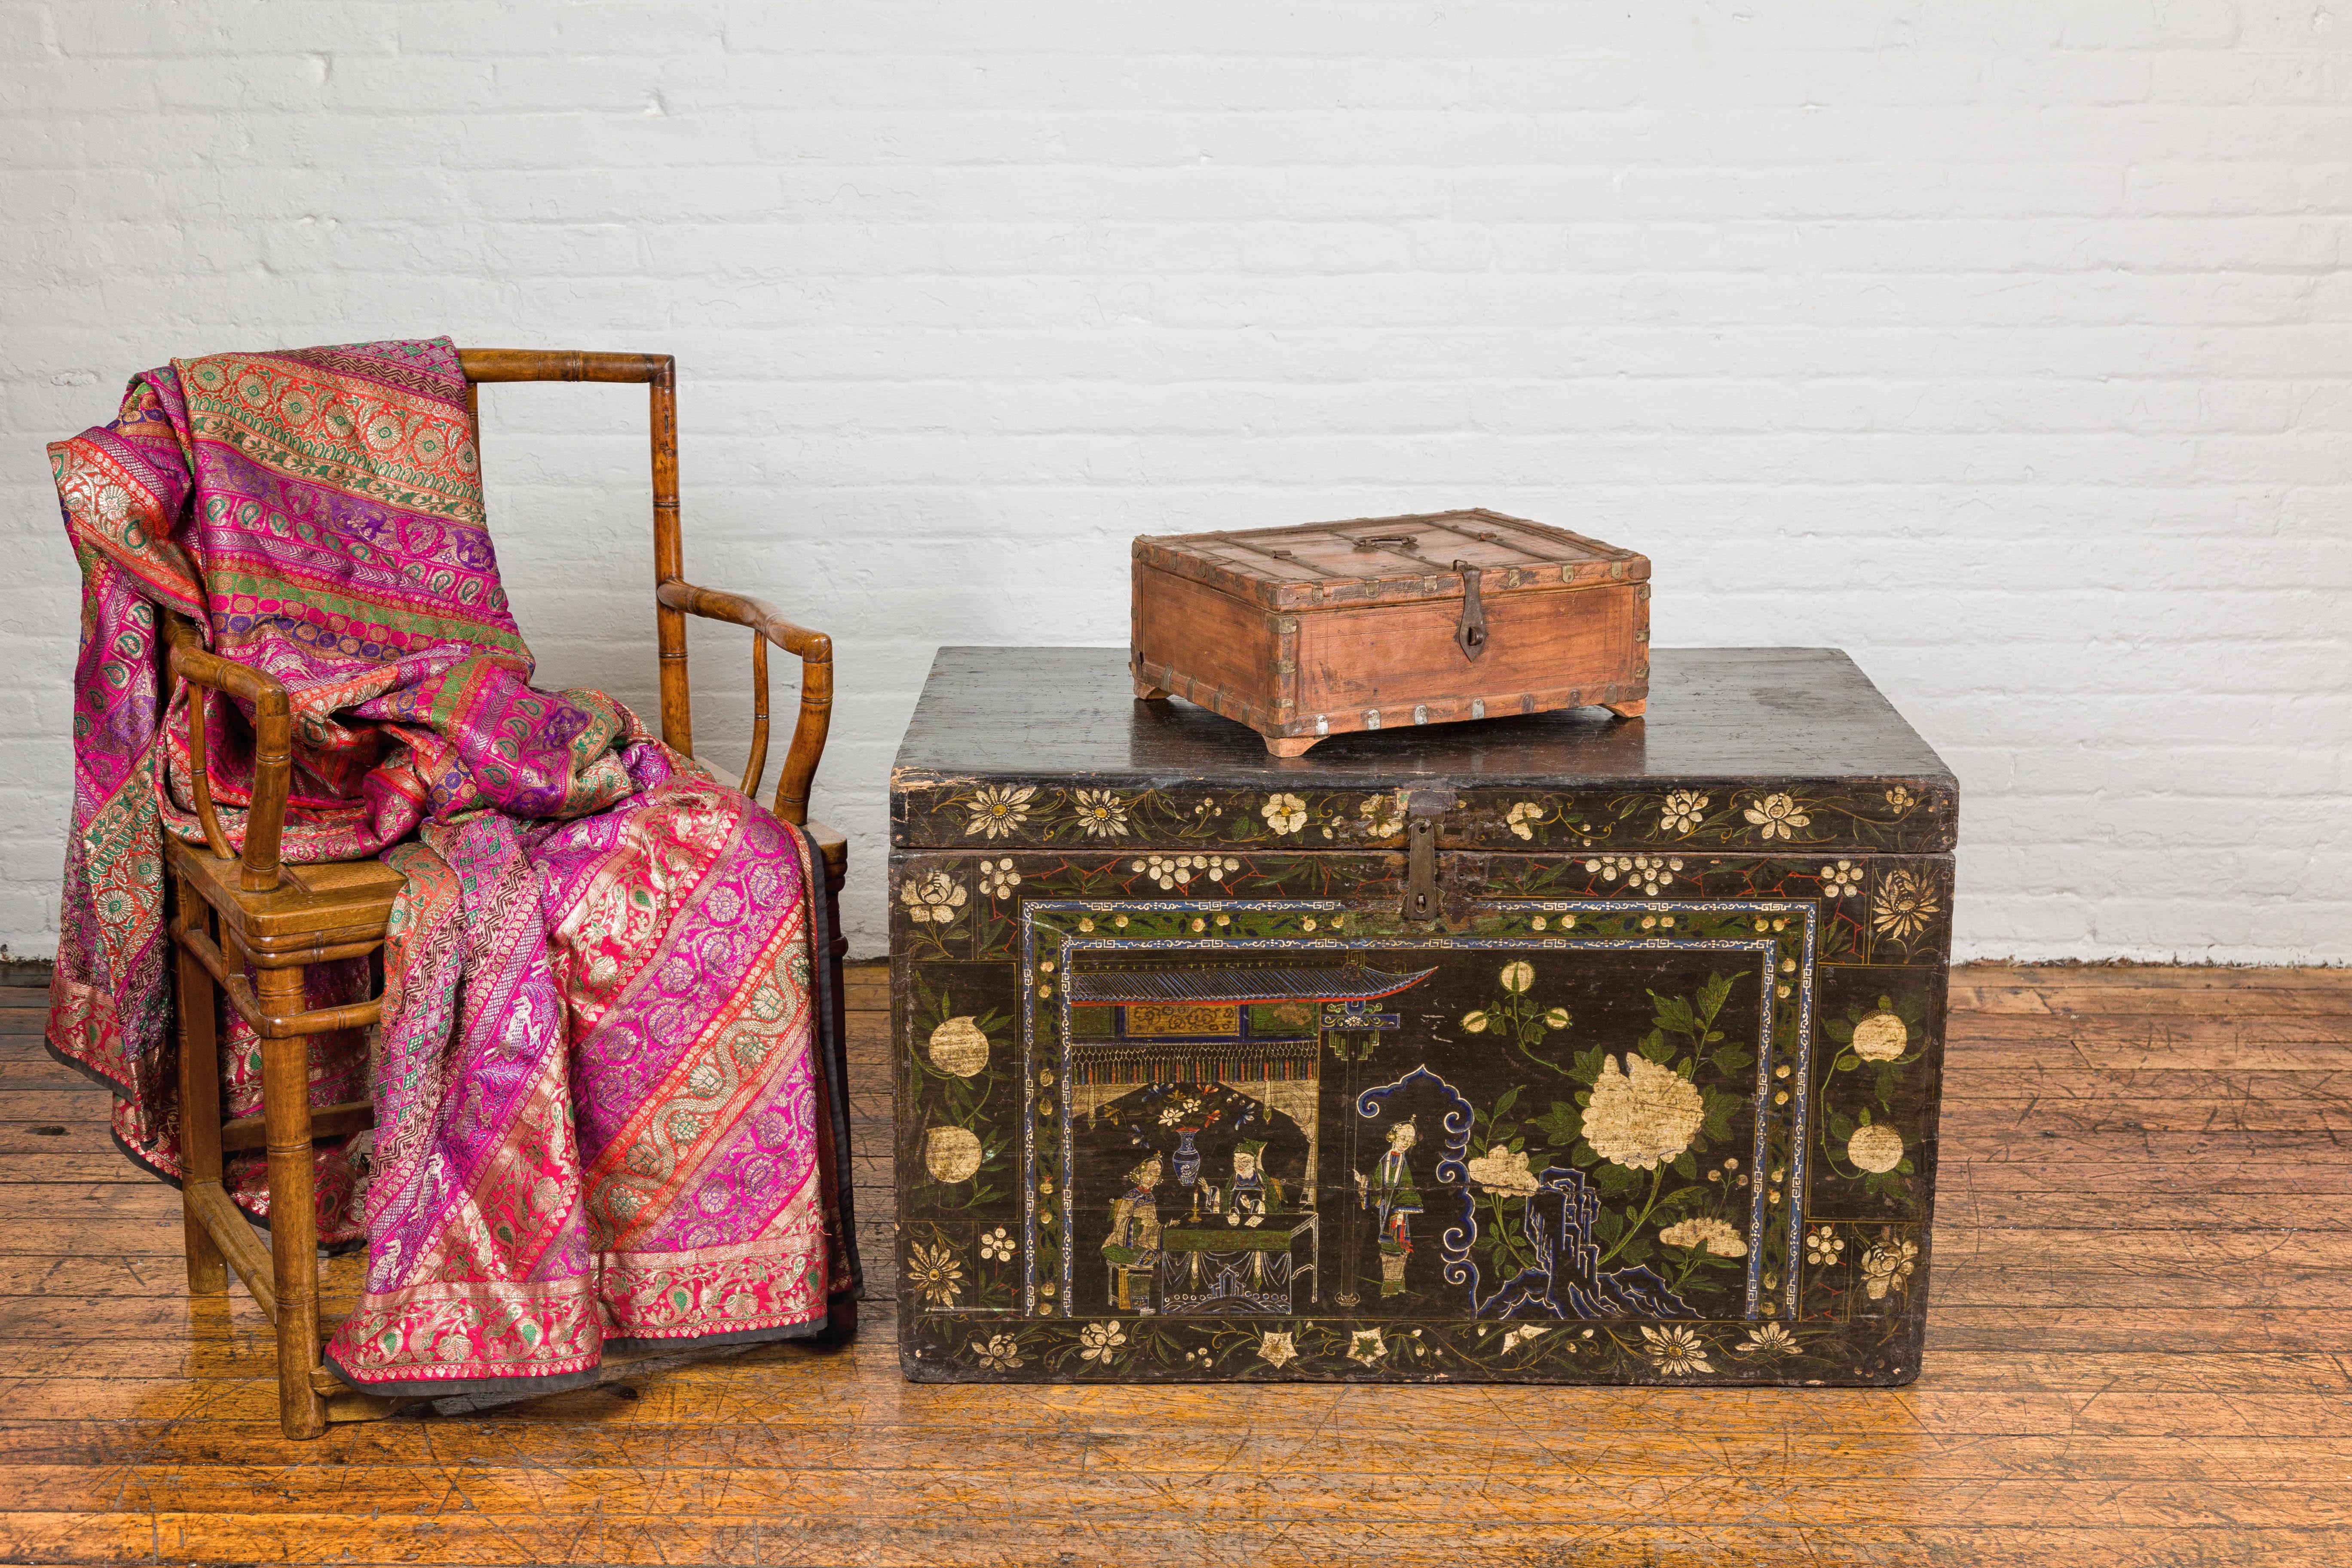 A rustic Indian wooden document box from the 19th century with brass details, partial opening top and petite bracket feet. This rustic Indian wooden document box from the 19th century exudes an aura of historical charm and authenticity. Adorned with